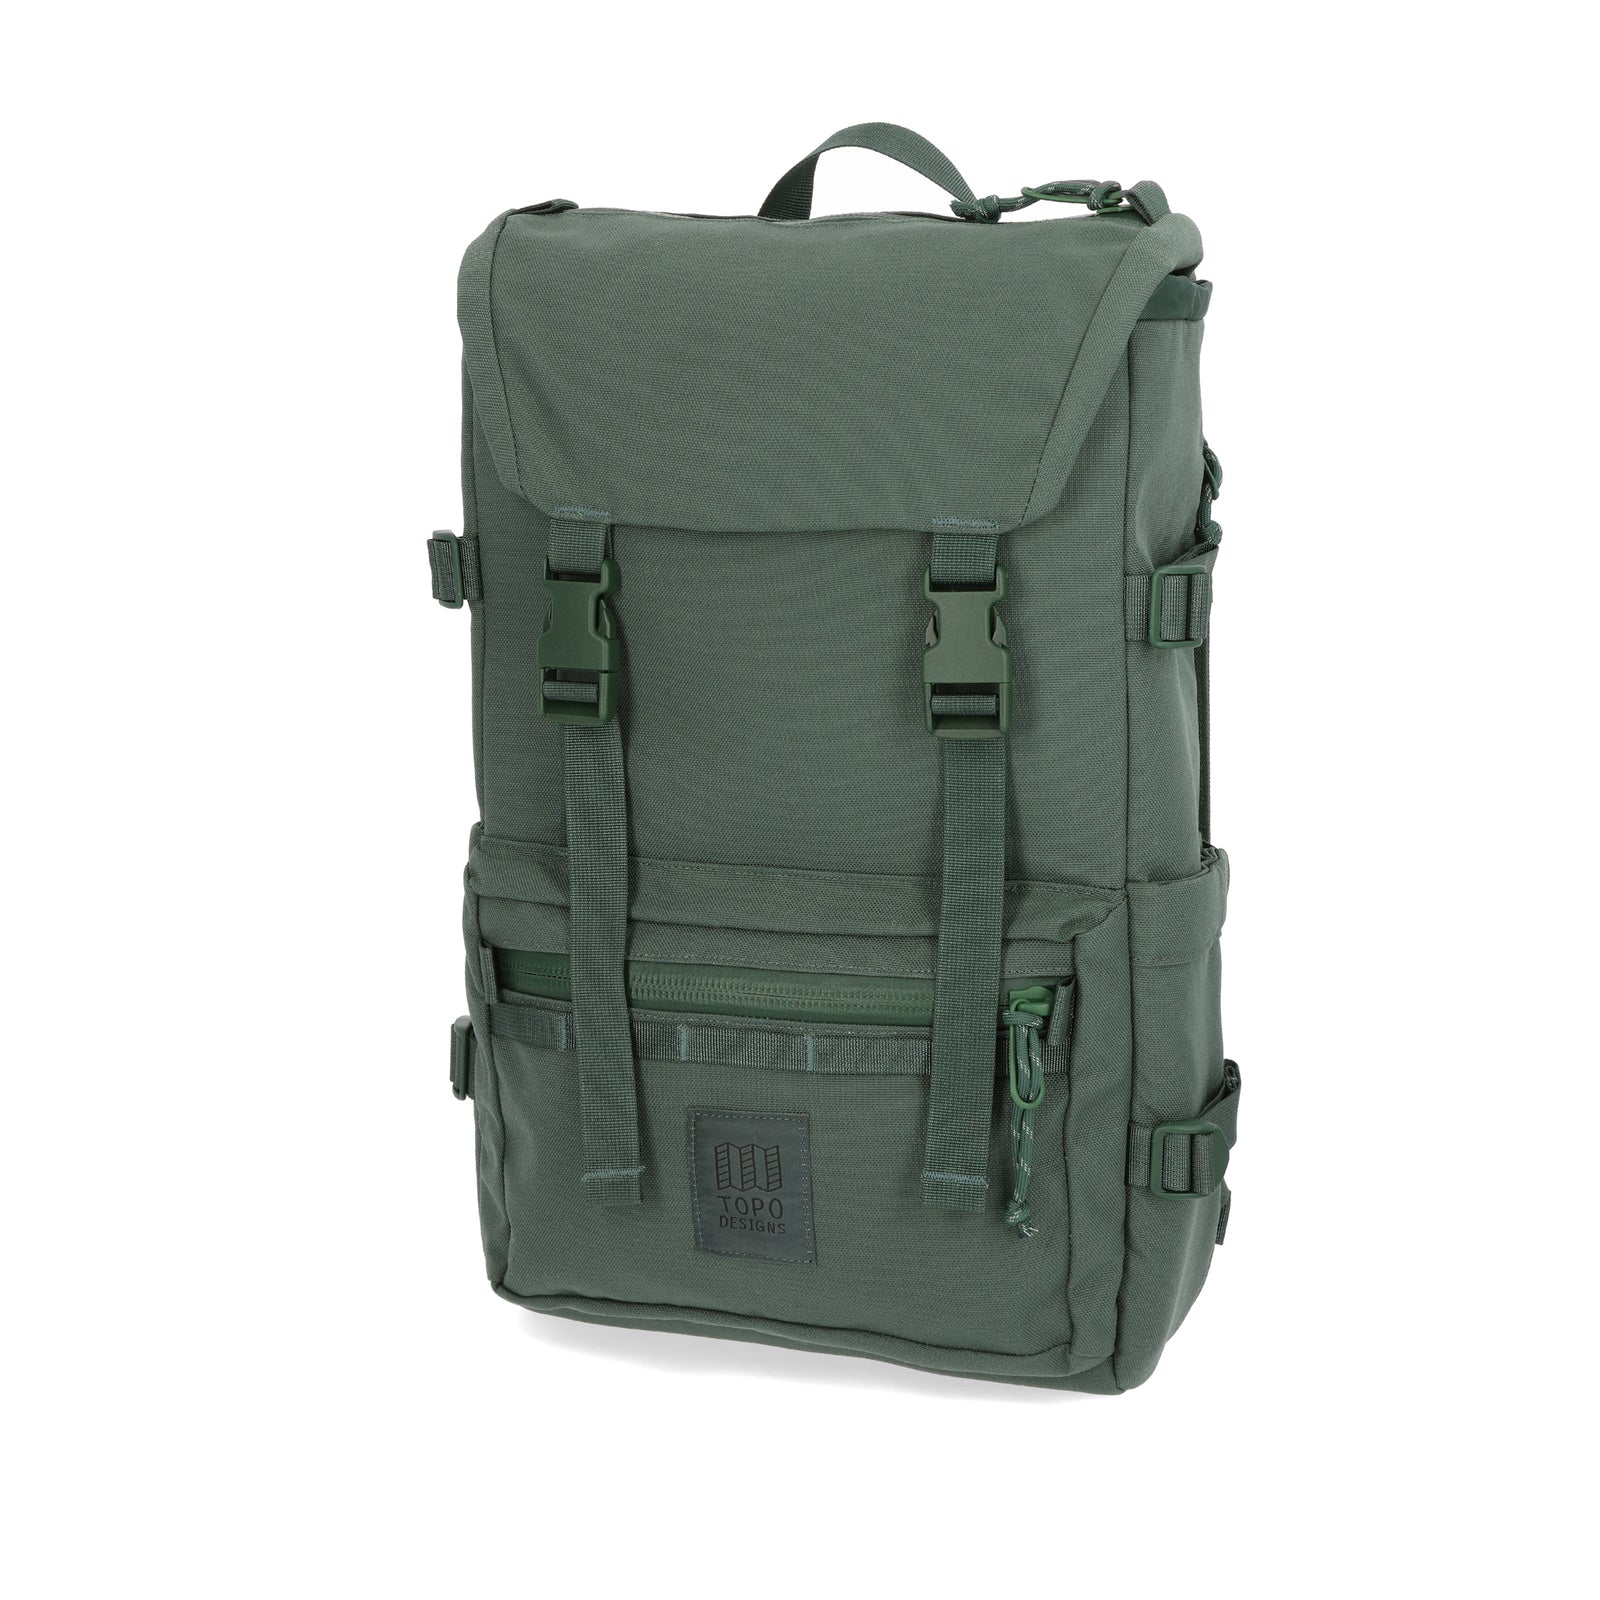 3/4 Front Product Shot of the Topo Designs Rover Pack Tech in "Forest" green.